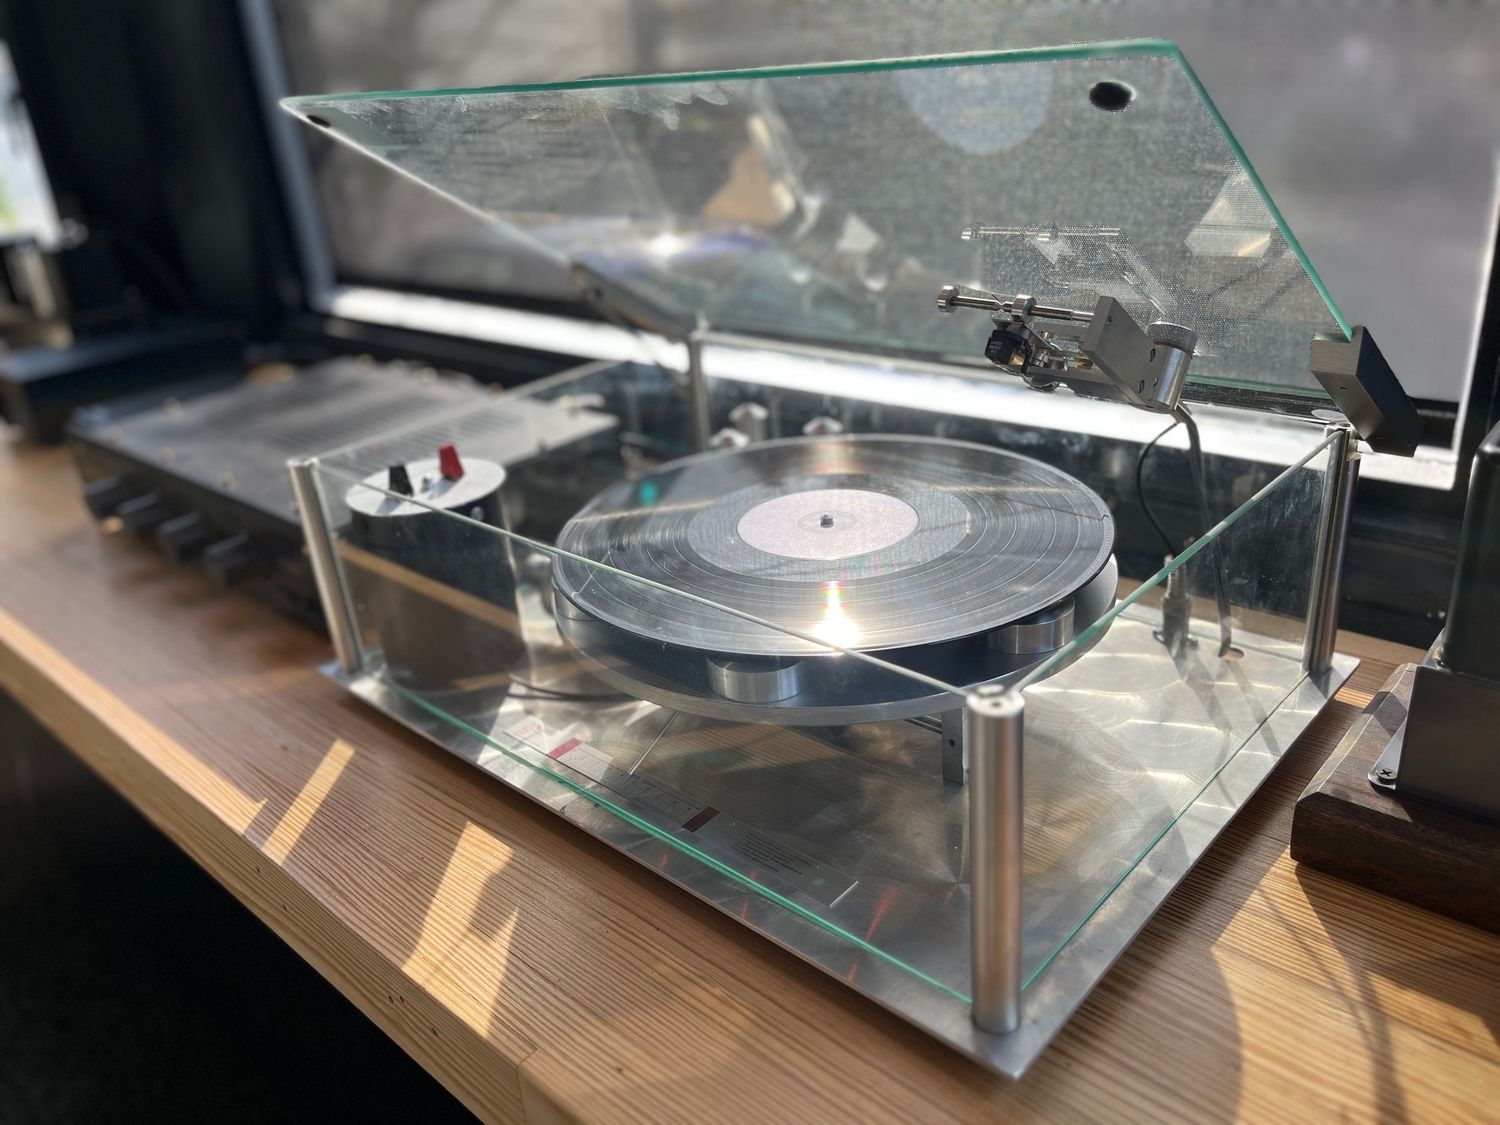 What Is Different About A Transcription Turntable?